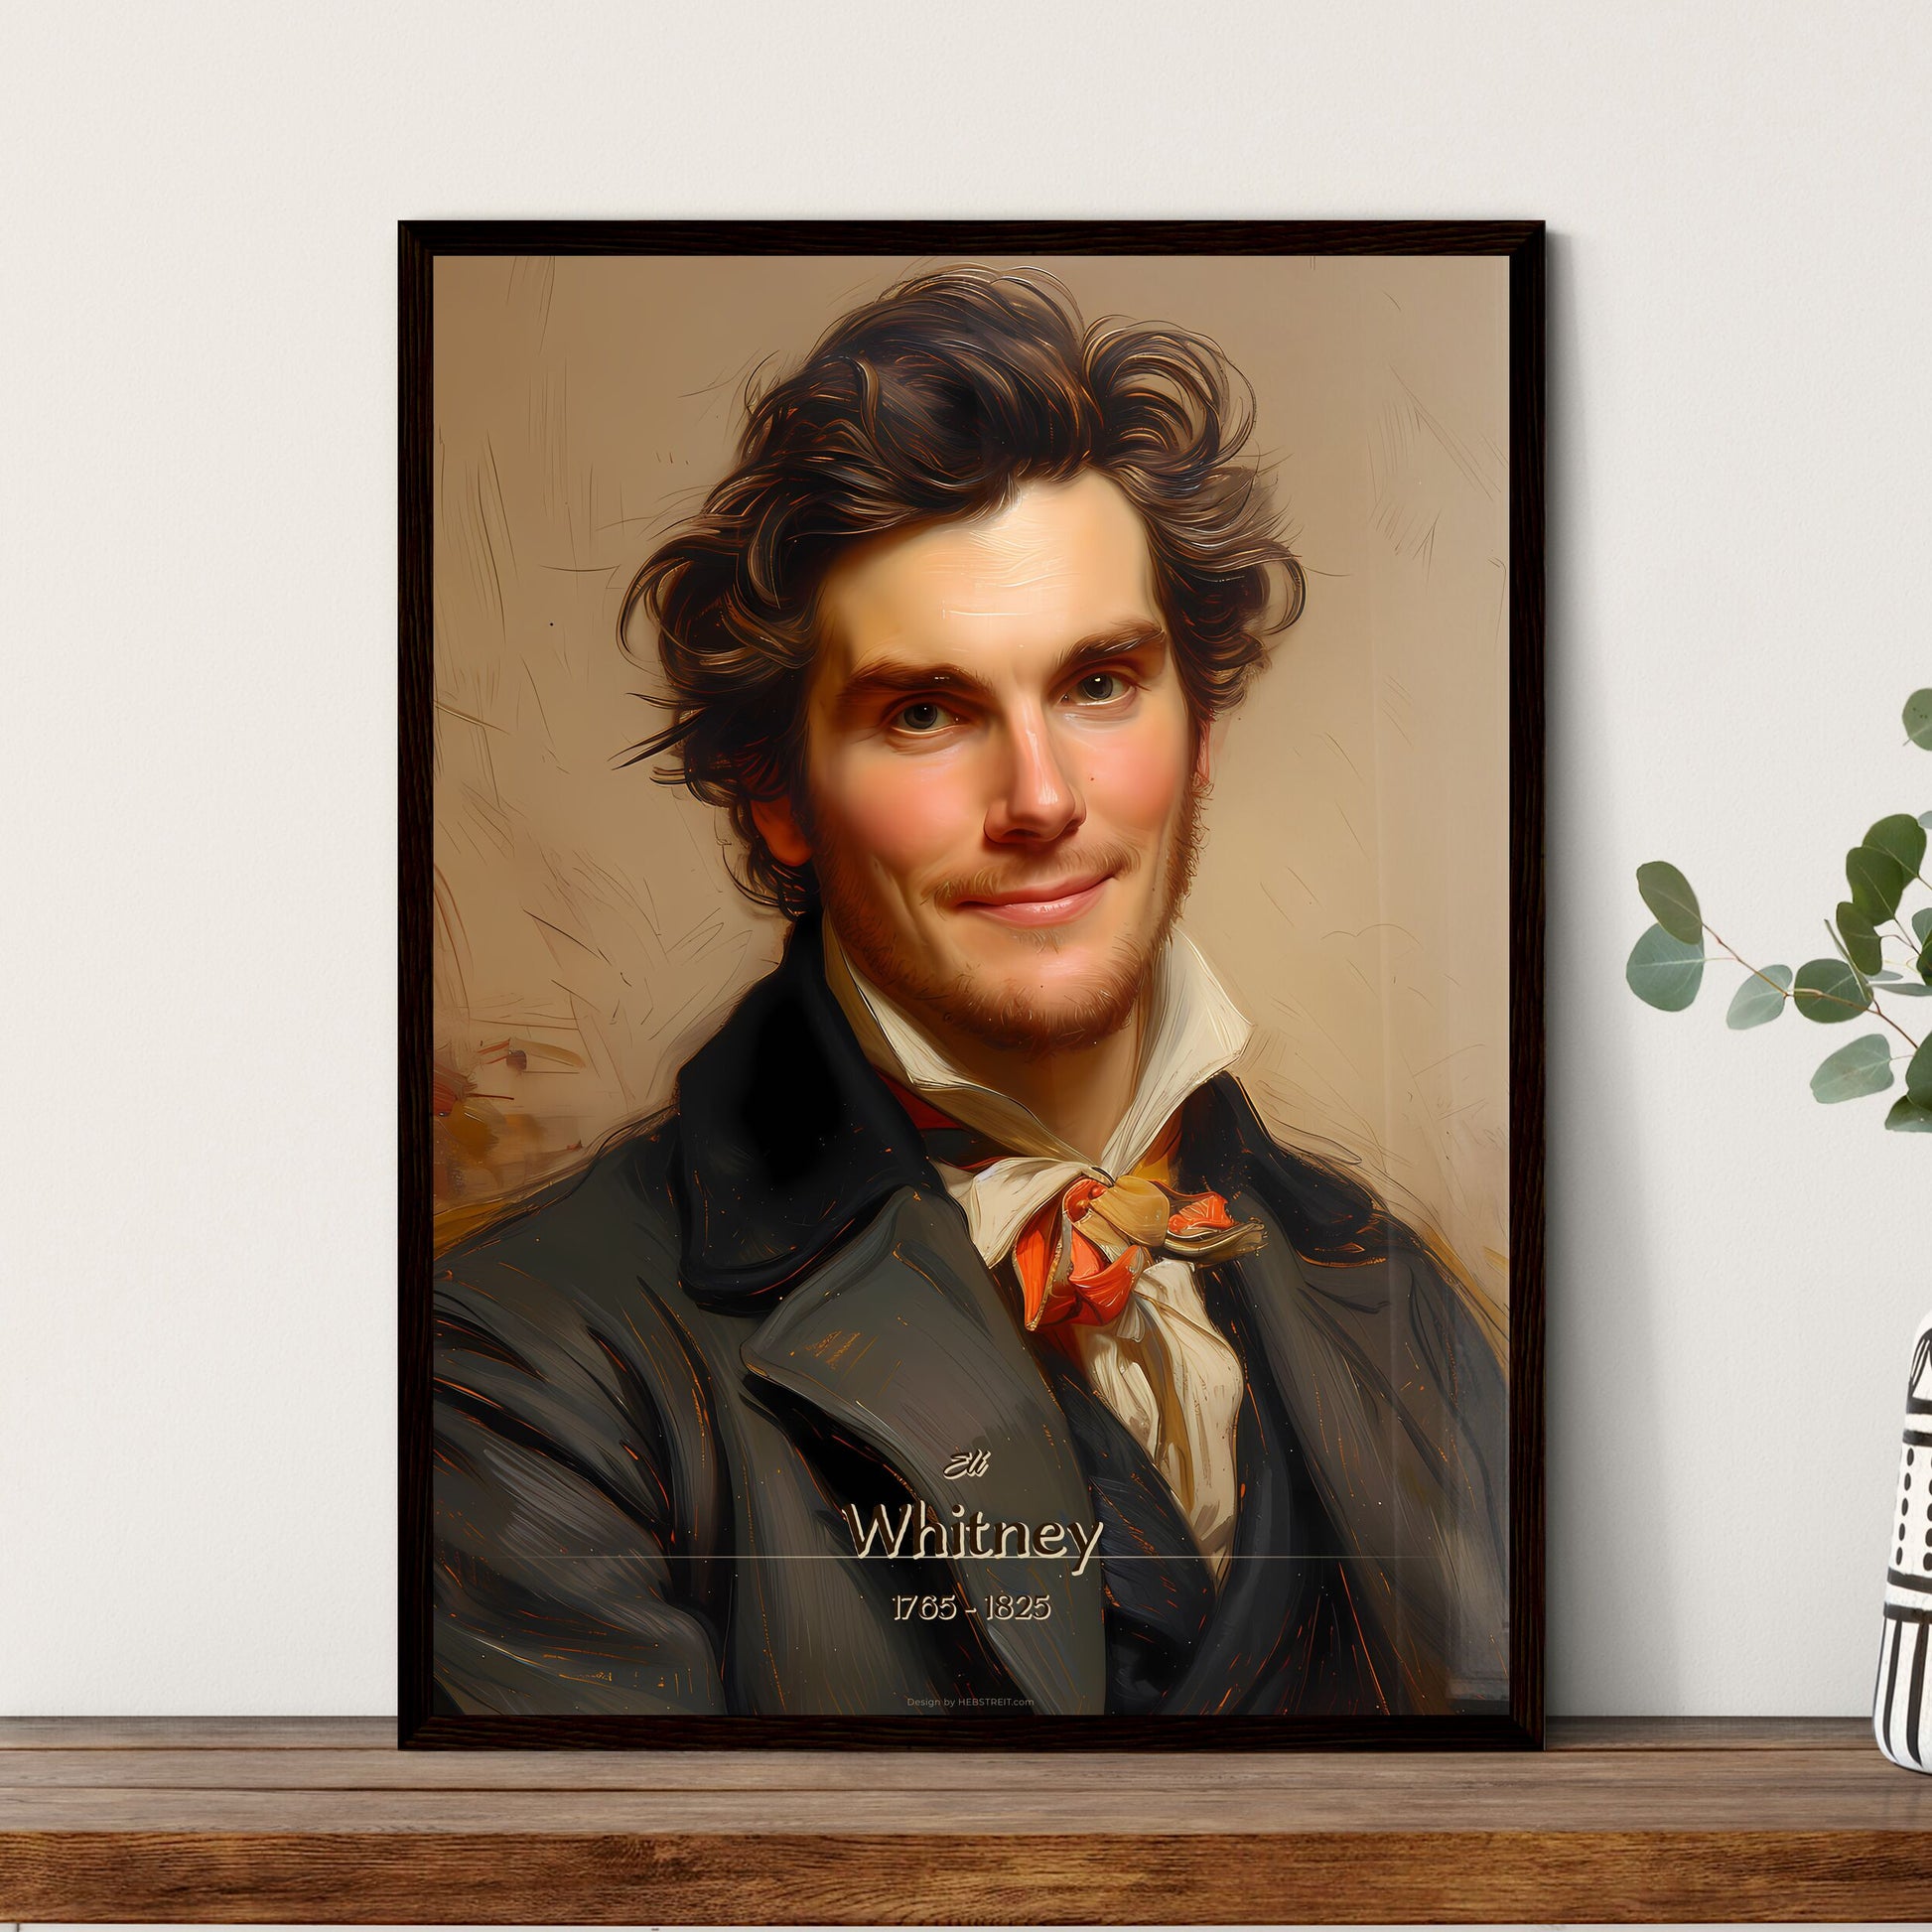 Eli, Whitney, 1765 - 1825, A Poster of a man in a suit Default Title